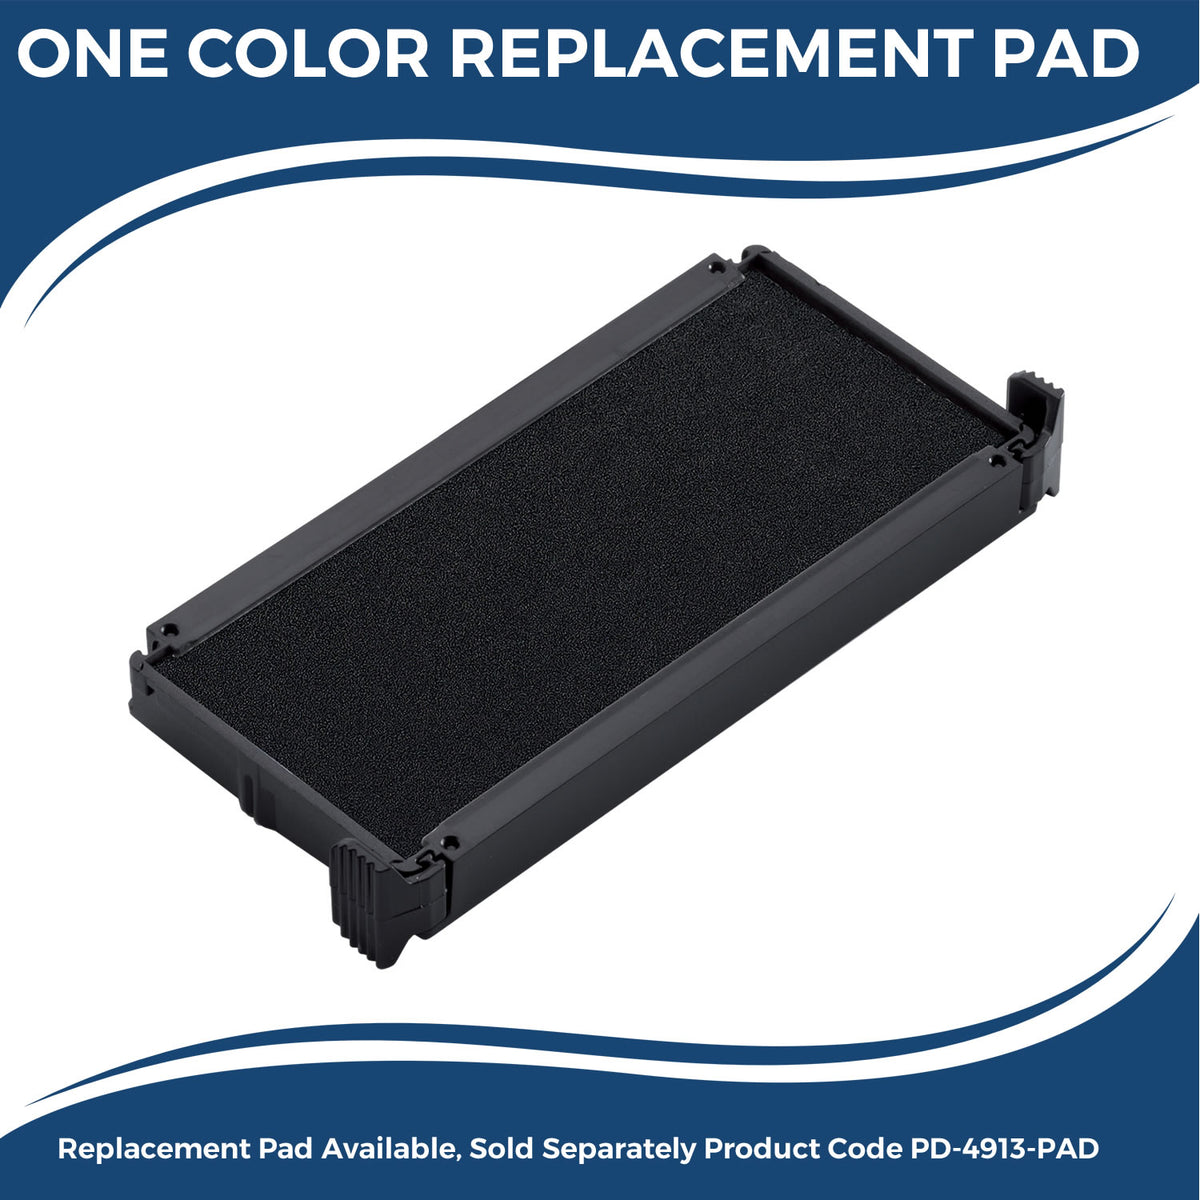 Large Self-Inking Restricted Area Stamp 5504S Large Replacment Pad